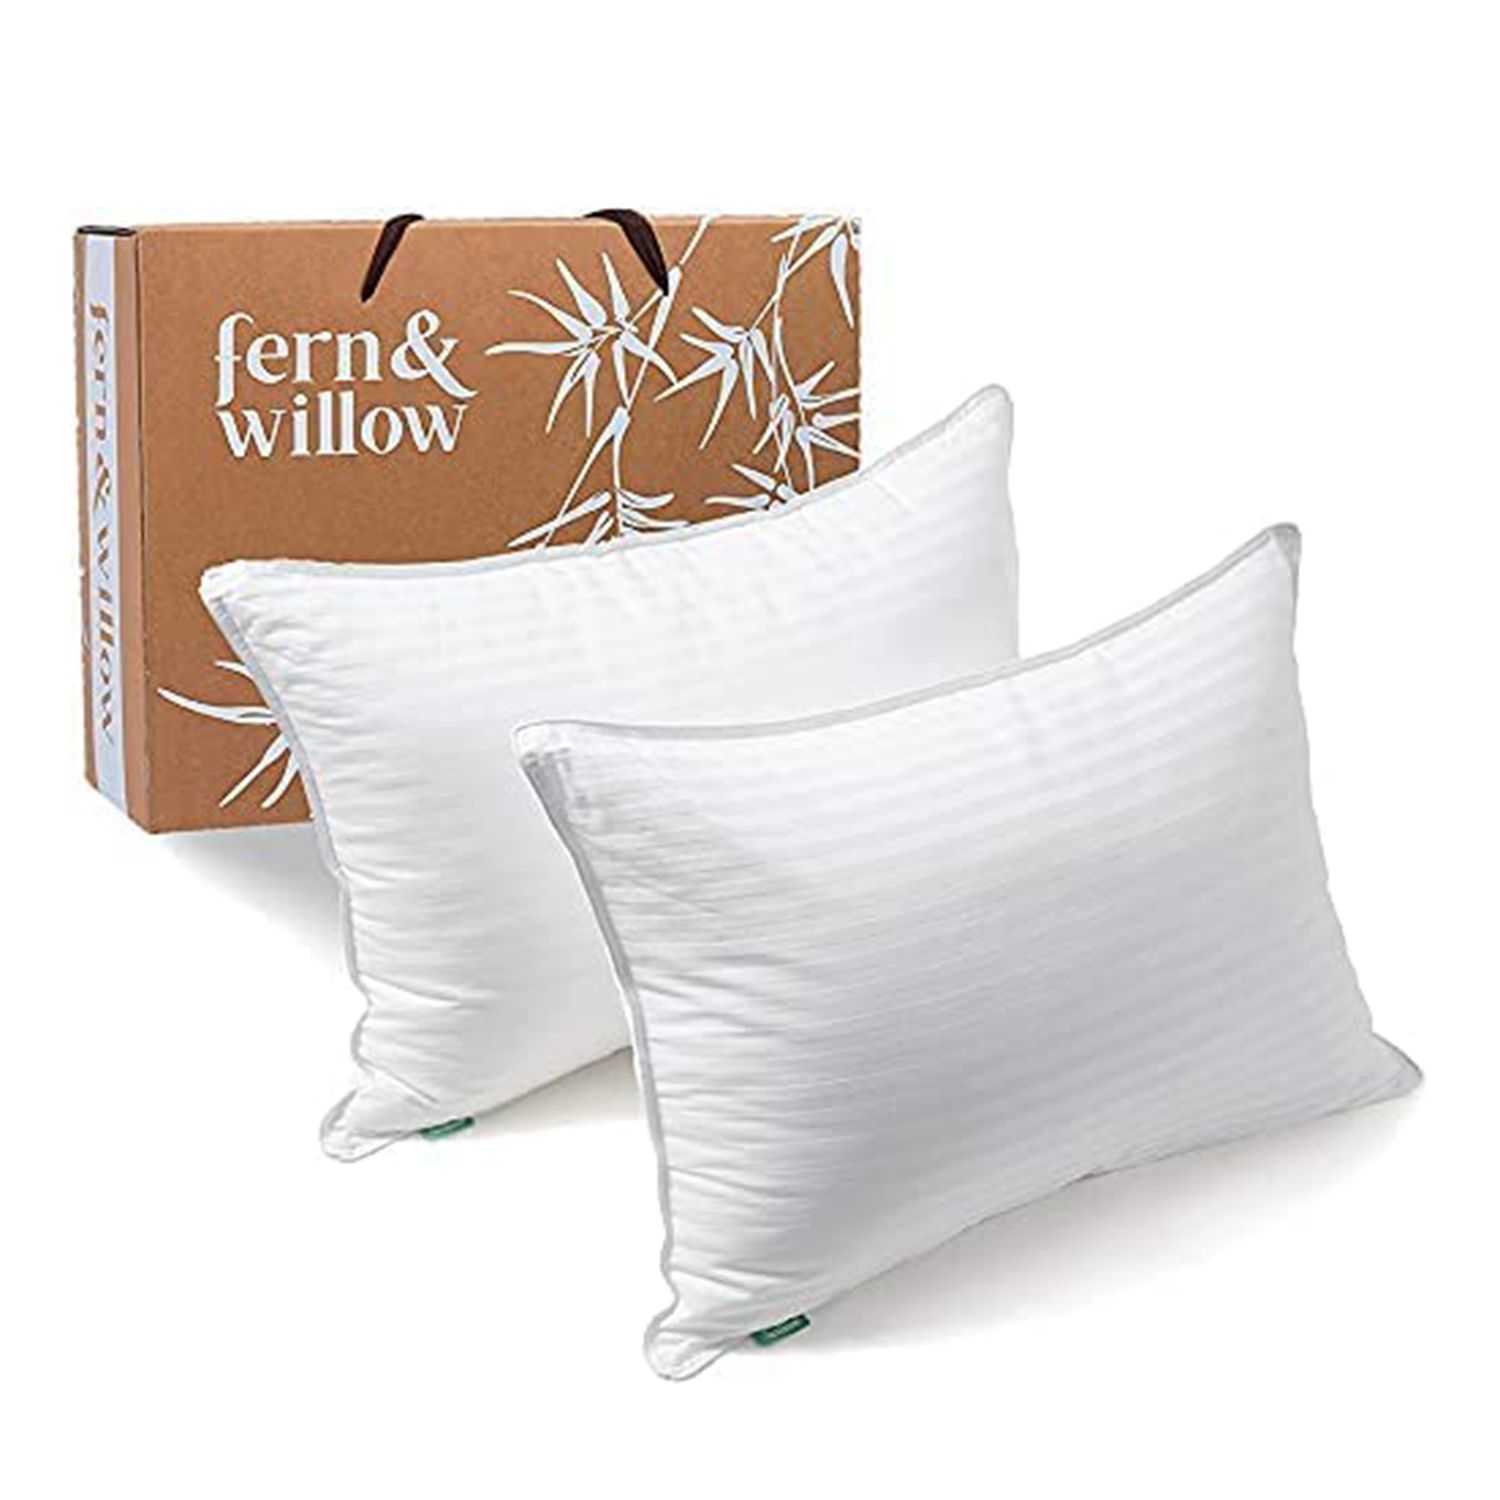 Fern and Willow Pillows for Sleeping